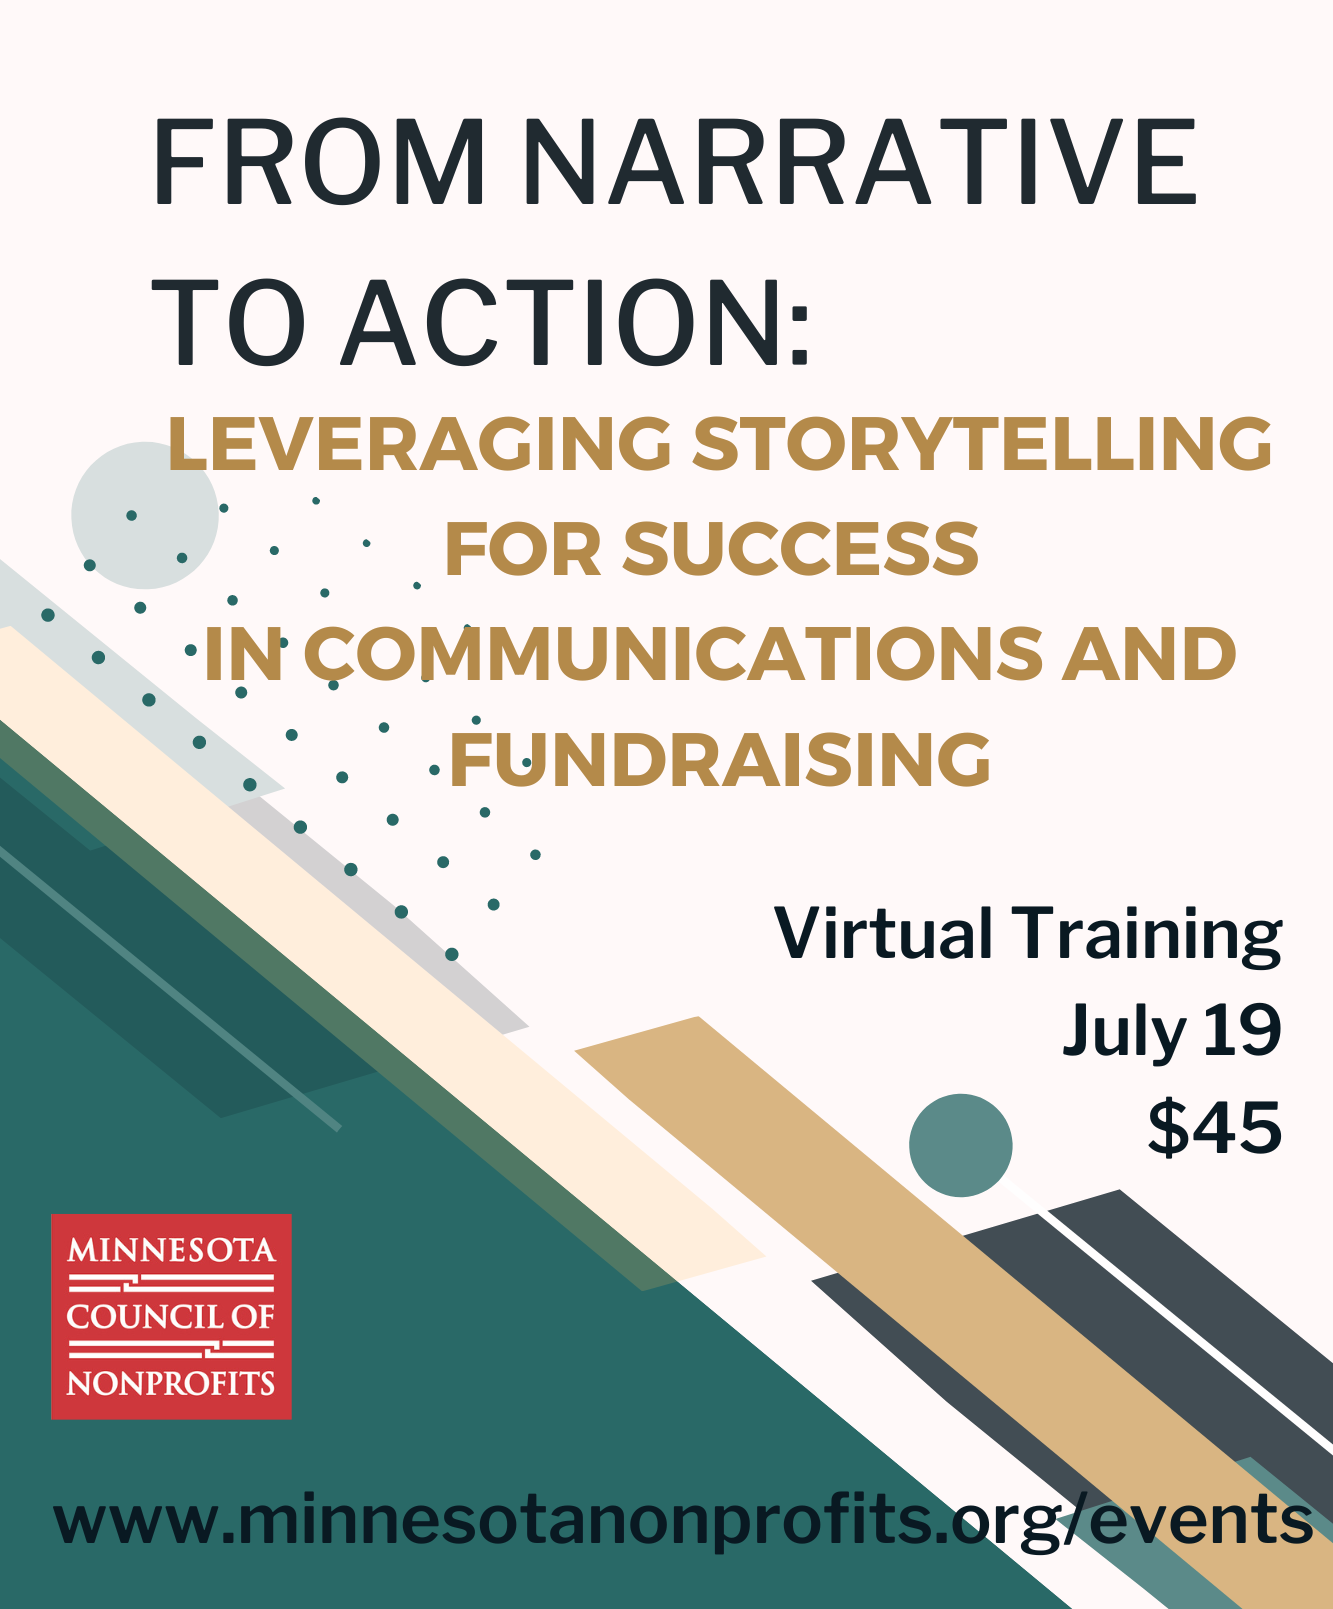 From Narrative to Action: Leveraging Storytelling for success in communications and fundraising